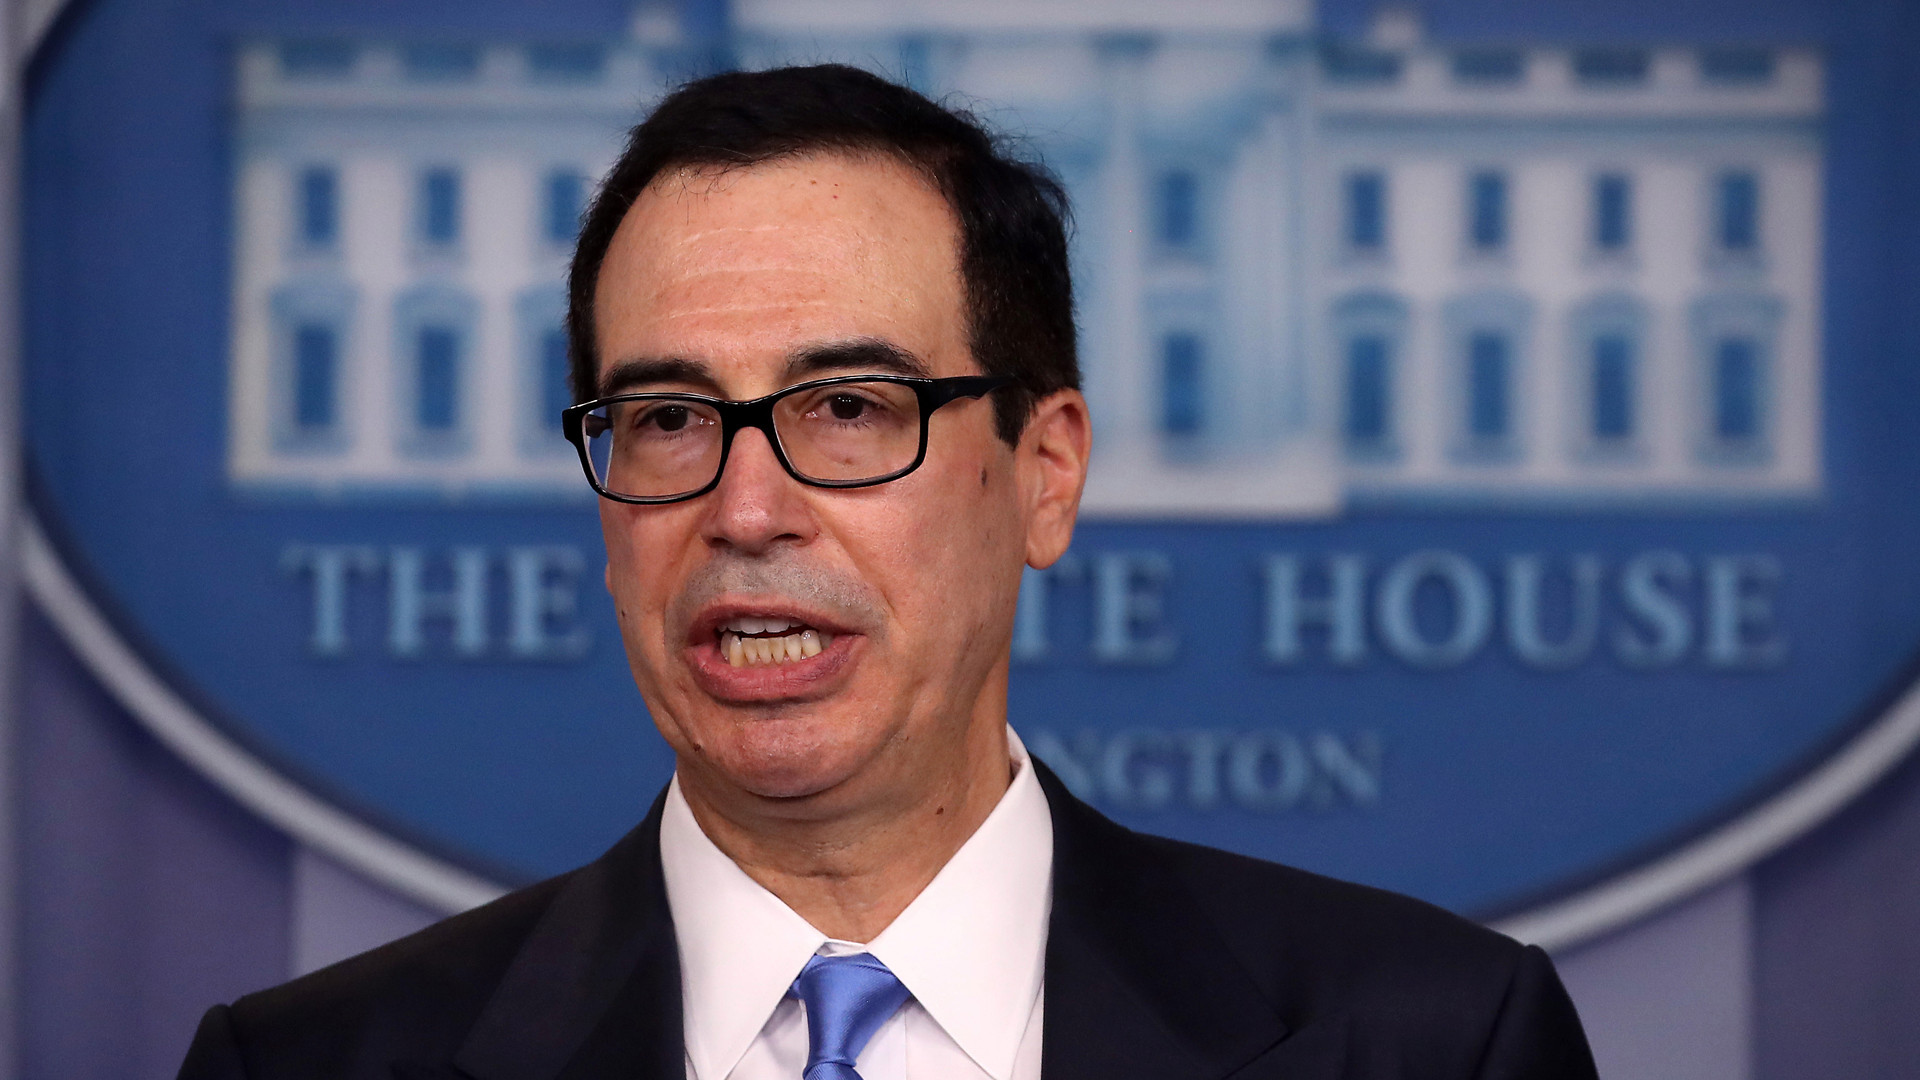 Mnuchin Powell To Face Grilling About Small Business Lending